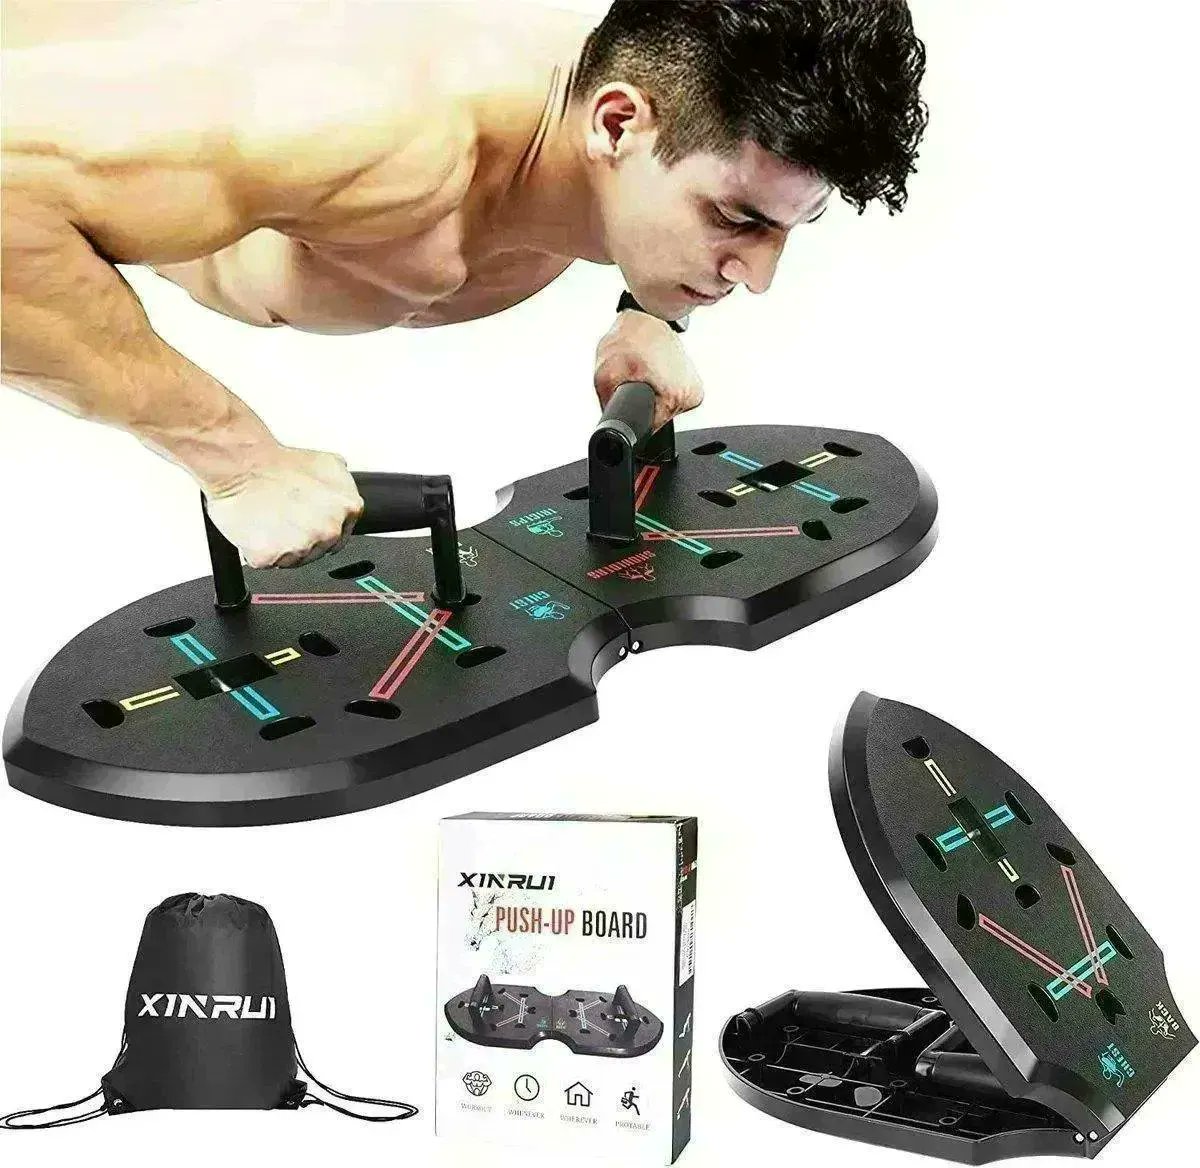 Quadropress Push Up Board for $14.99! (Retail $30)

Save 45% with promo code 45OY1EYA

fkd.sale/?l=https://amz…